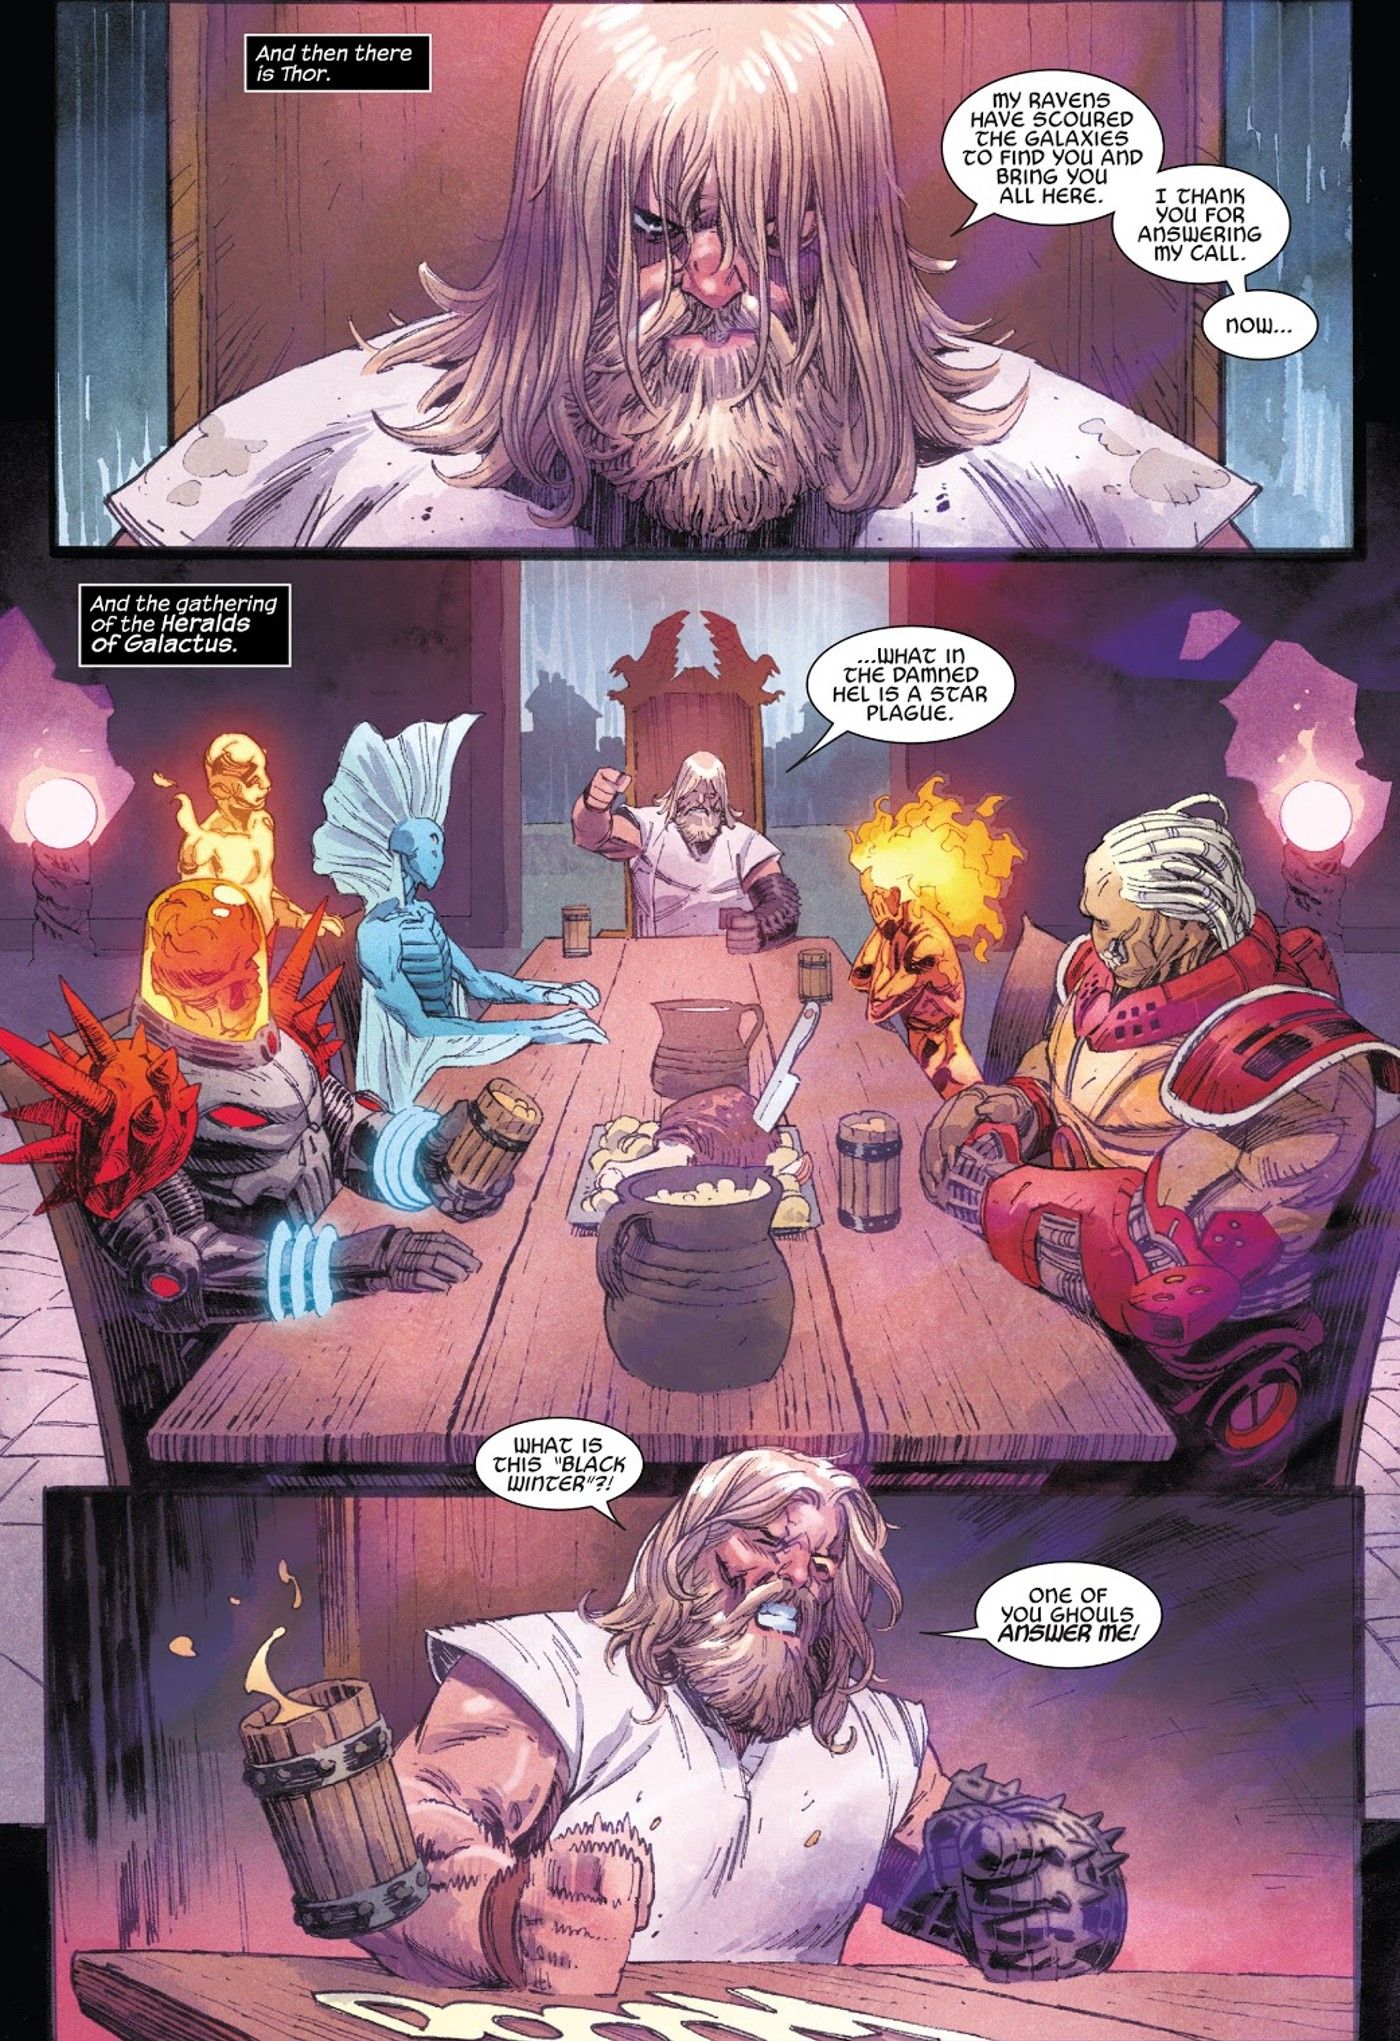 panels from Thor